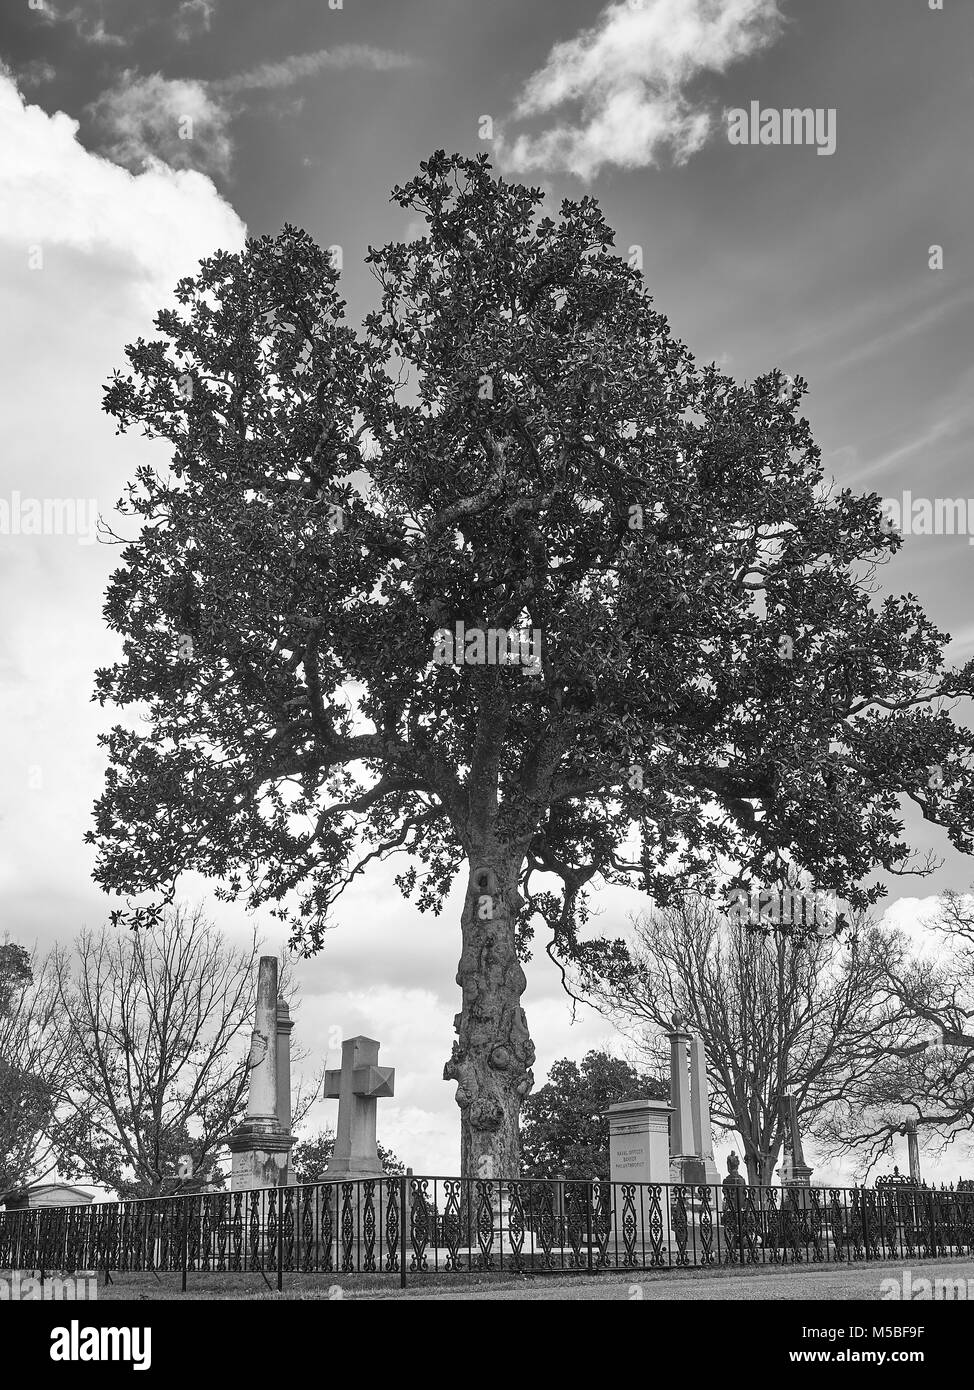 Old Oakwood Cemetery with headstones, gravestones and monuments established in the early 1800's for all faiths in Montgomery, Alabama USA. Stock Photo